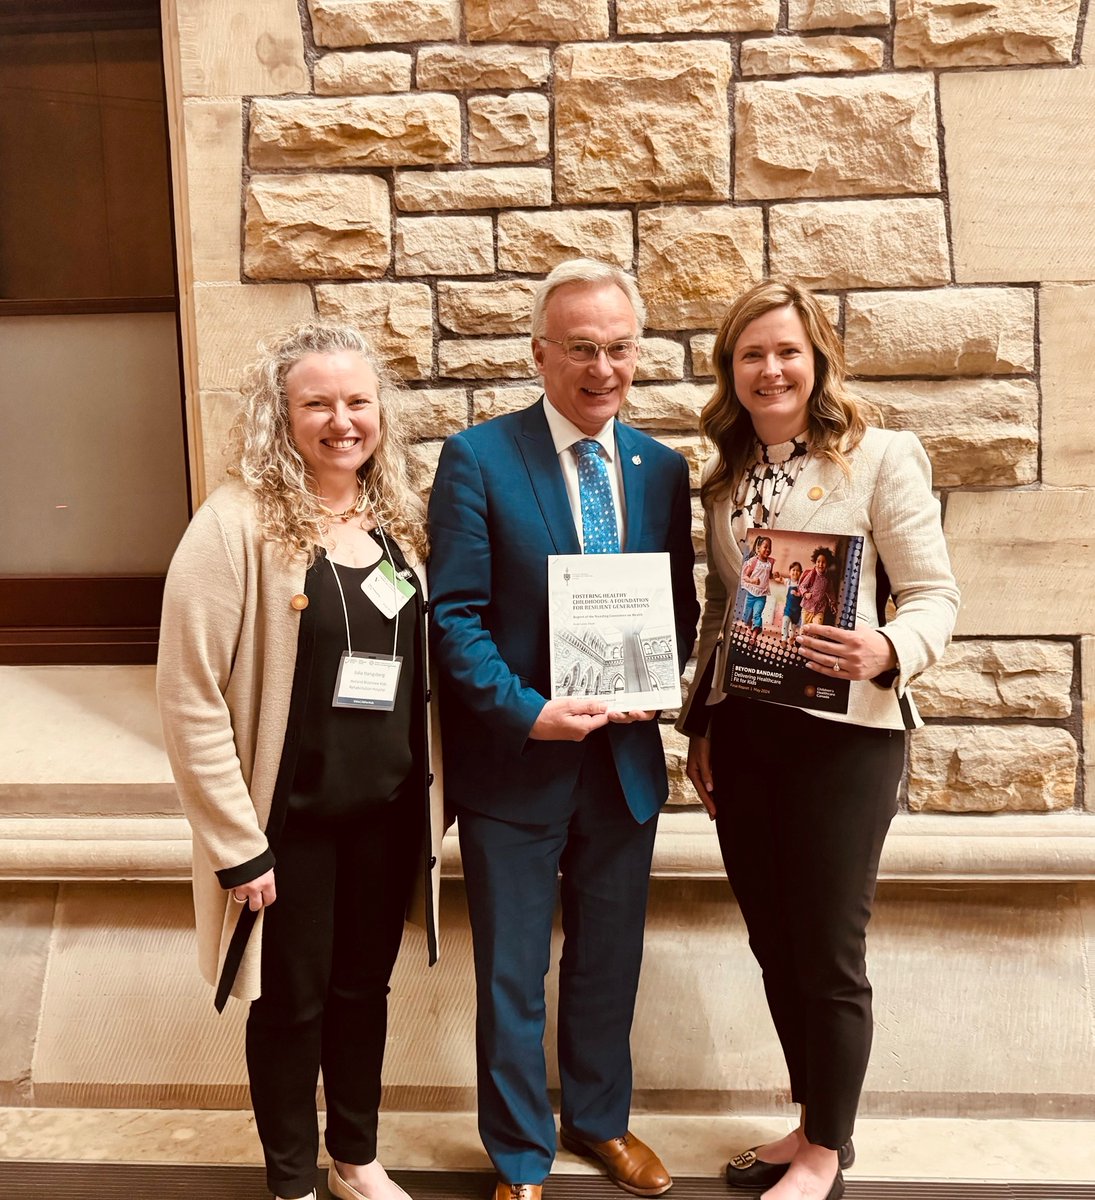 It was an honour to meet with the Chair of HESA Committee @SeanCaseyLPC on the occasion of the release of the Child Health Study report. #WeCANforKids bit.ly/46f7JQ8 @Hanigsberg @EGruenwoldt